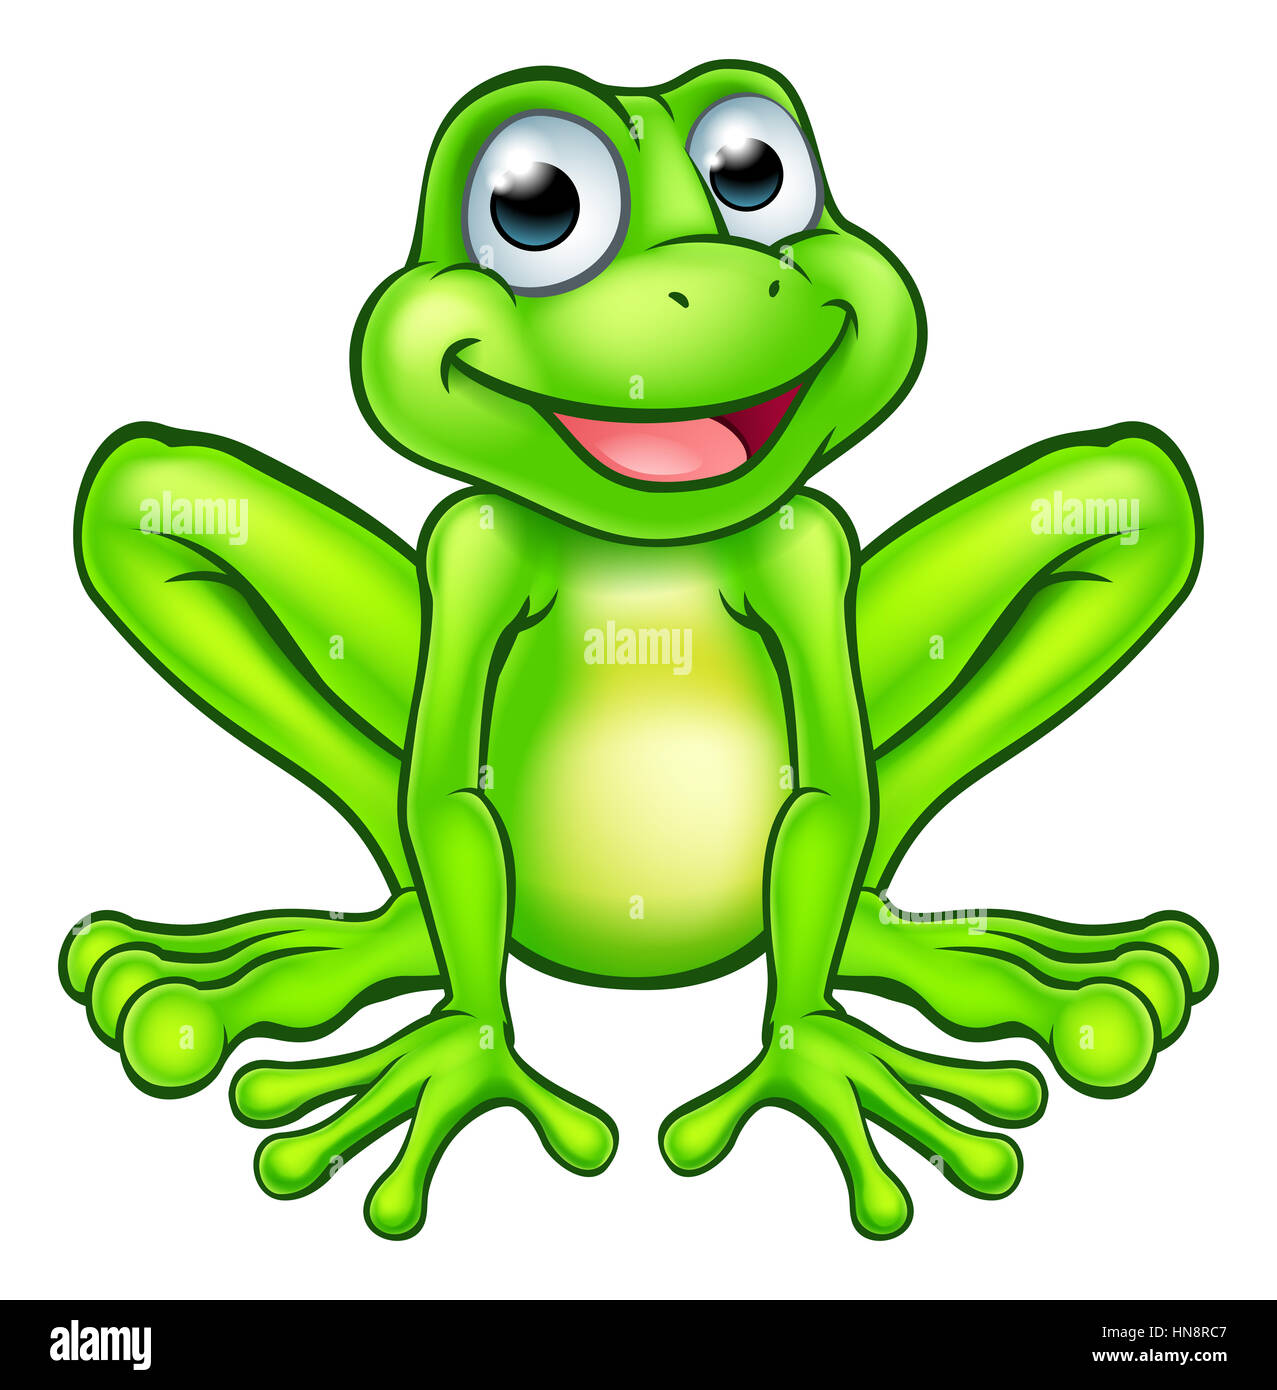 An illustration of a cute cartoon frog mascot character Stock Photo - Alamy